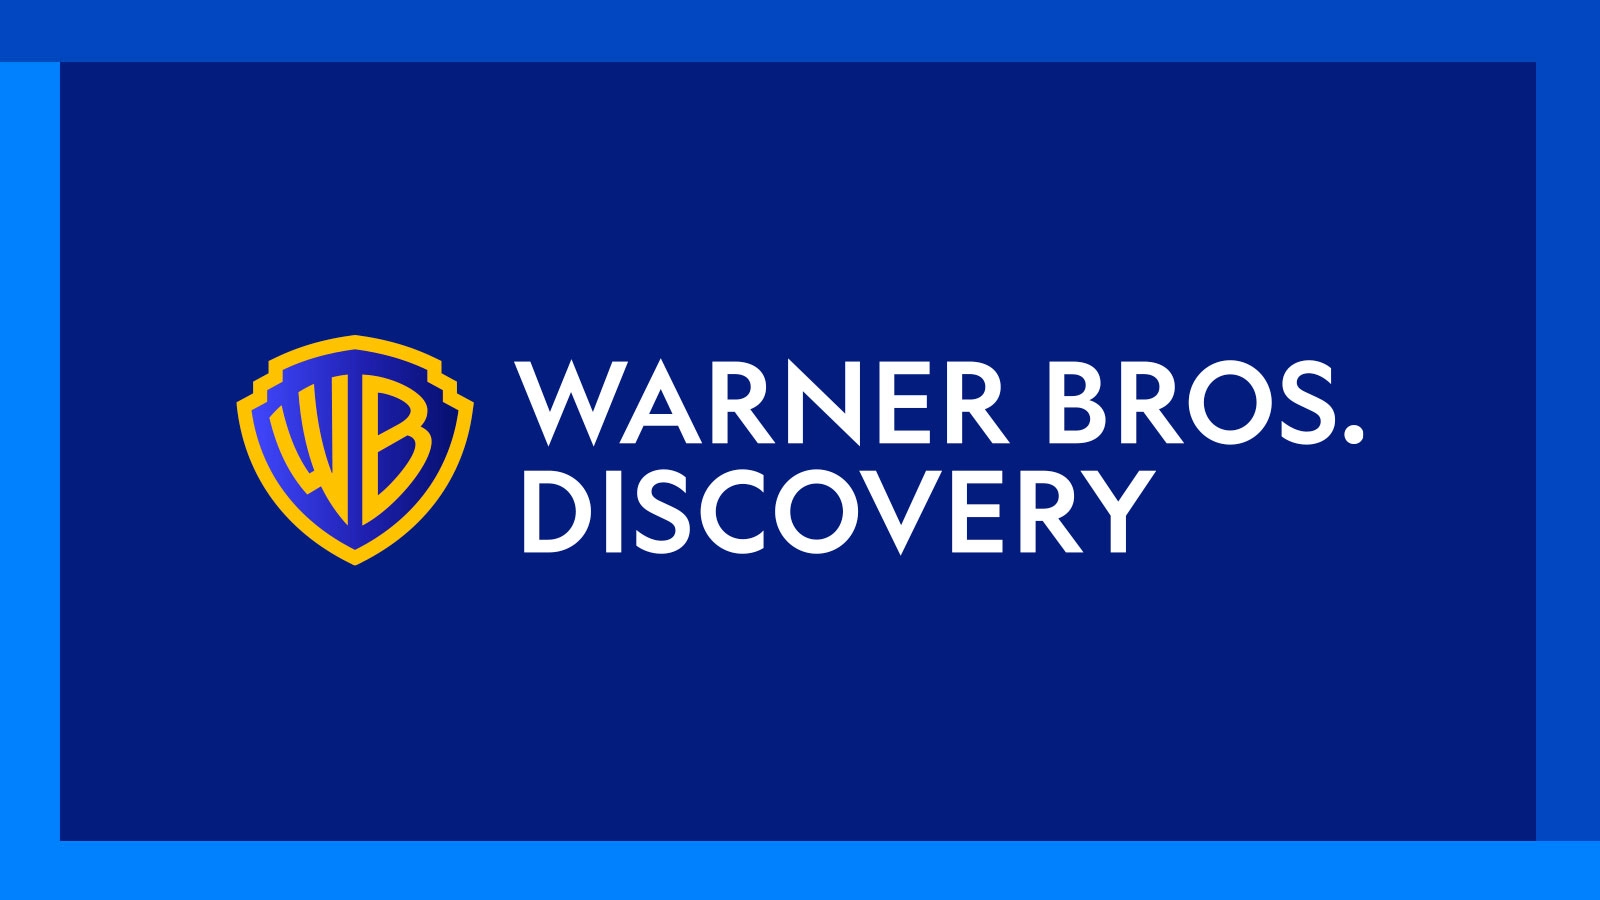 Warner Bros. Is Changing Its Strategy: Discovery+ Remains Intact